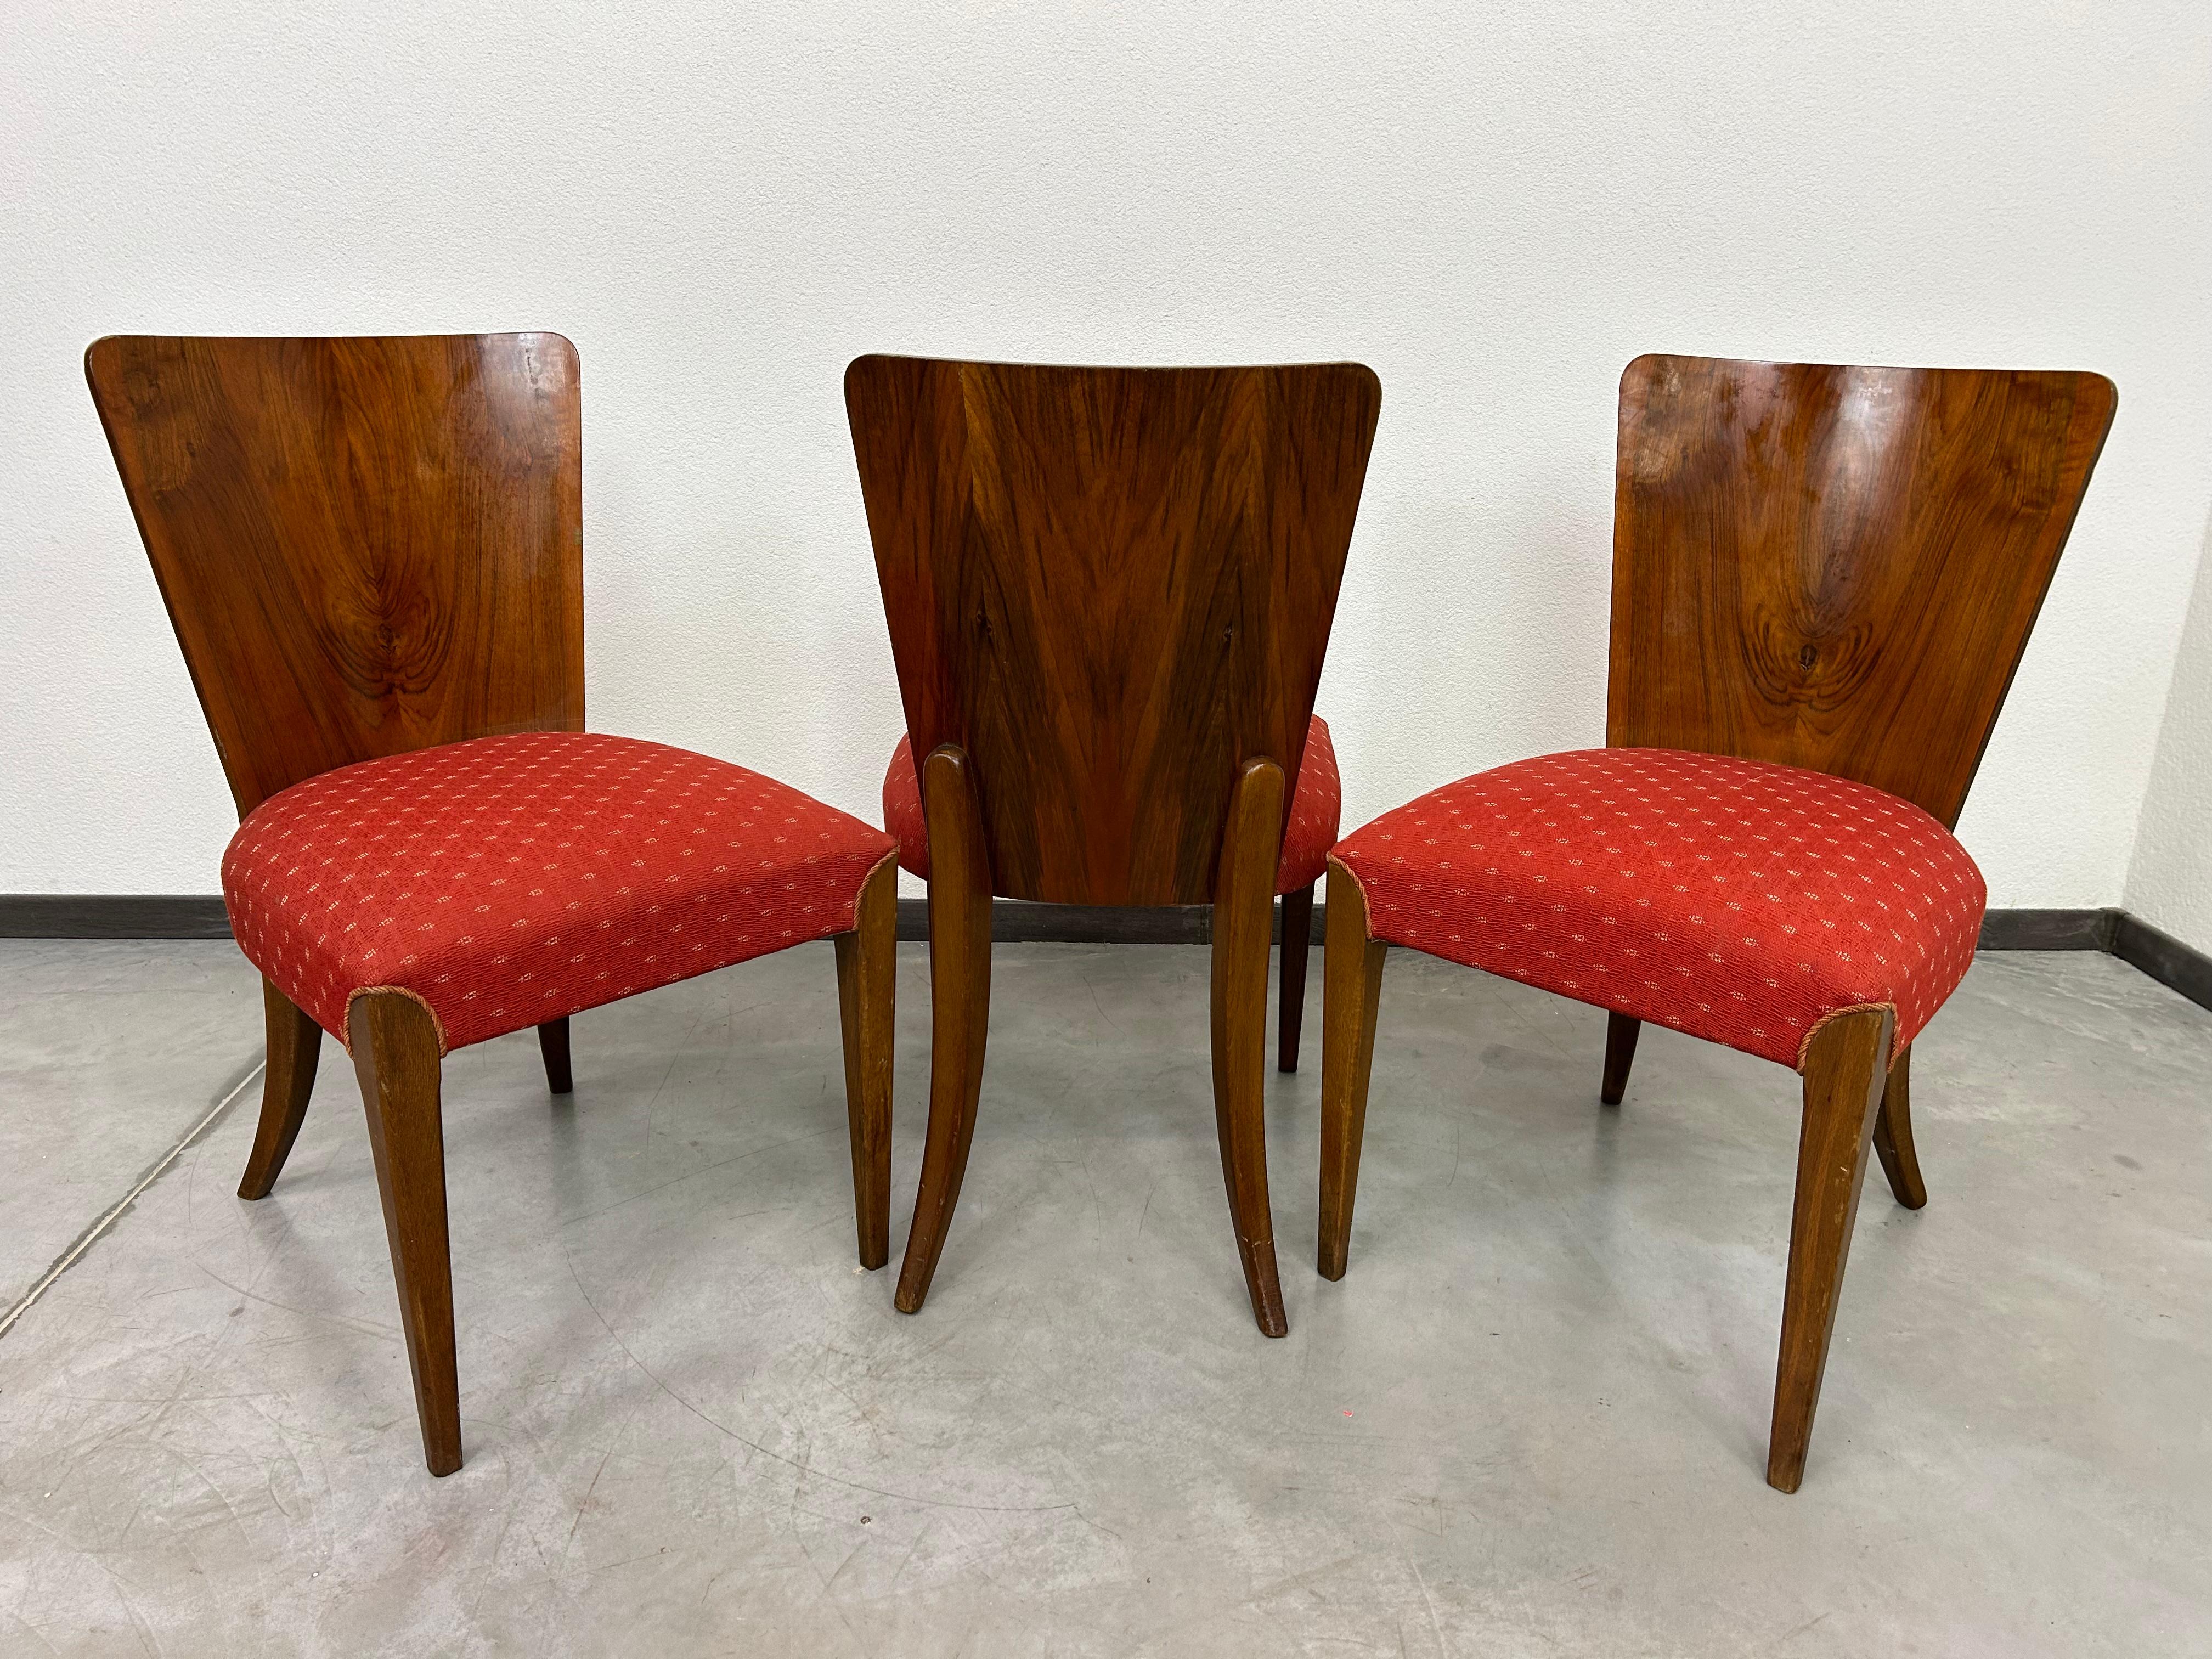 Set of four walnut dining chairs, mod. H-214, designed by Jindrich Halabala for Up Zavody in very nice original condition. Manufactured in the 1950s in Czechoslovakia.